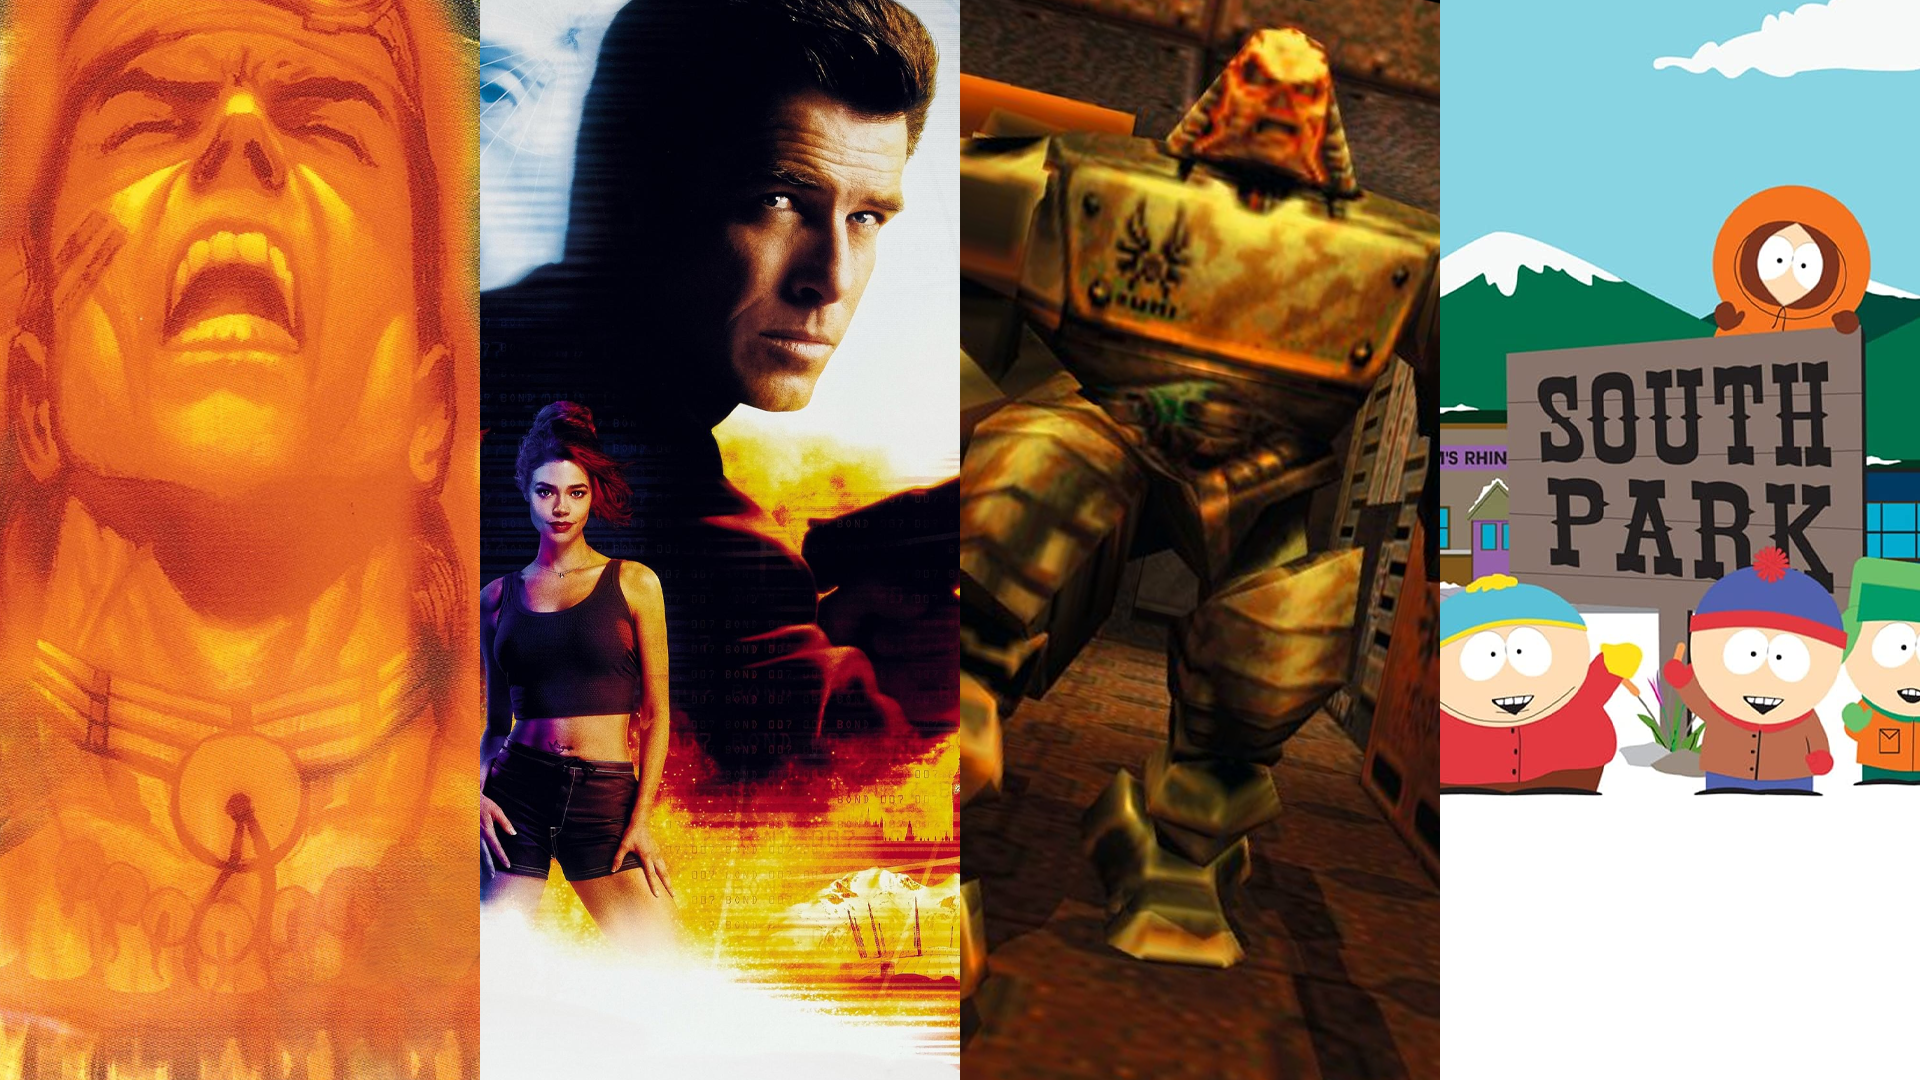 Image for DF Retro Play: N64 First-Person Shooters - Quake 2, Turok 3, South Park, The World Is Not Enough